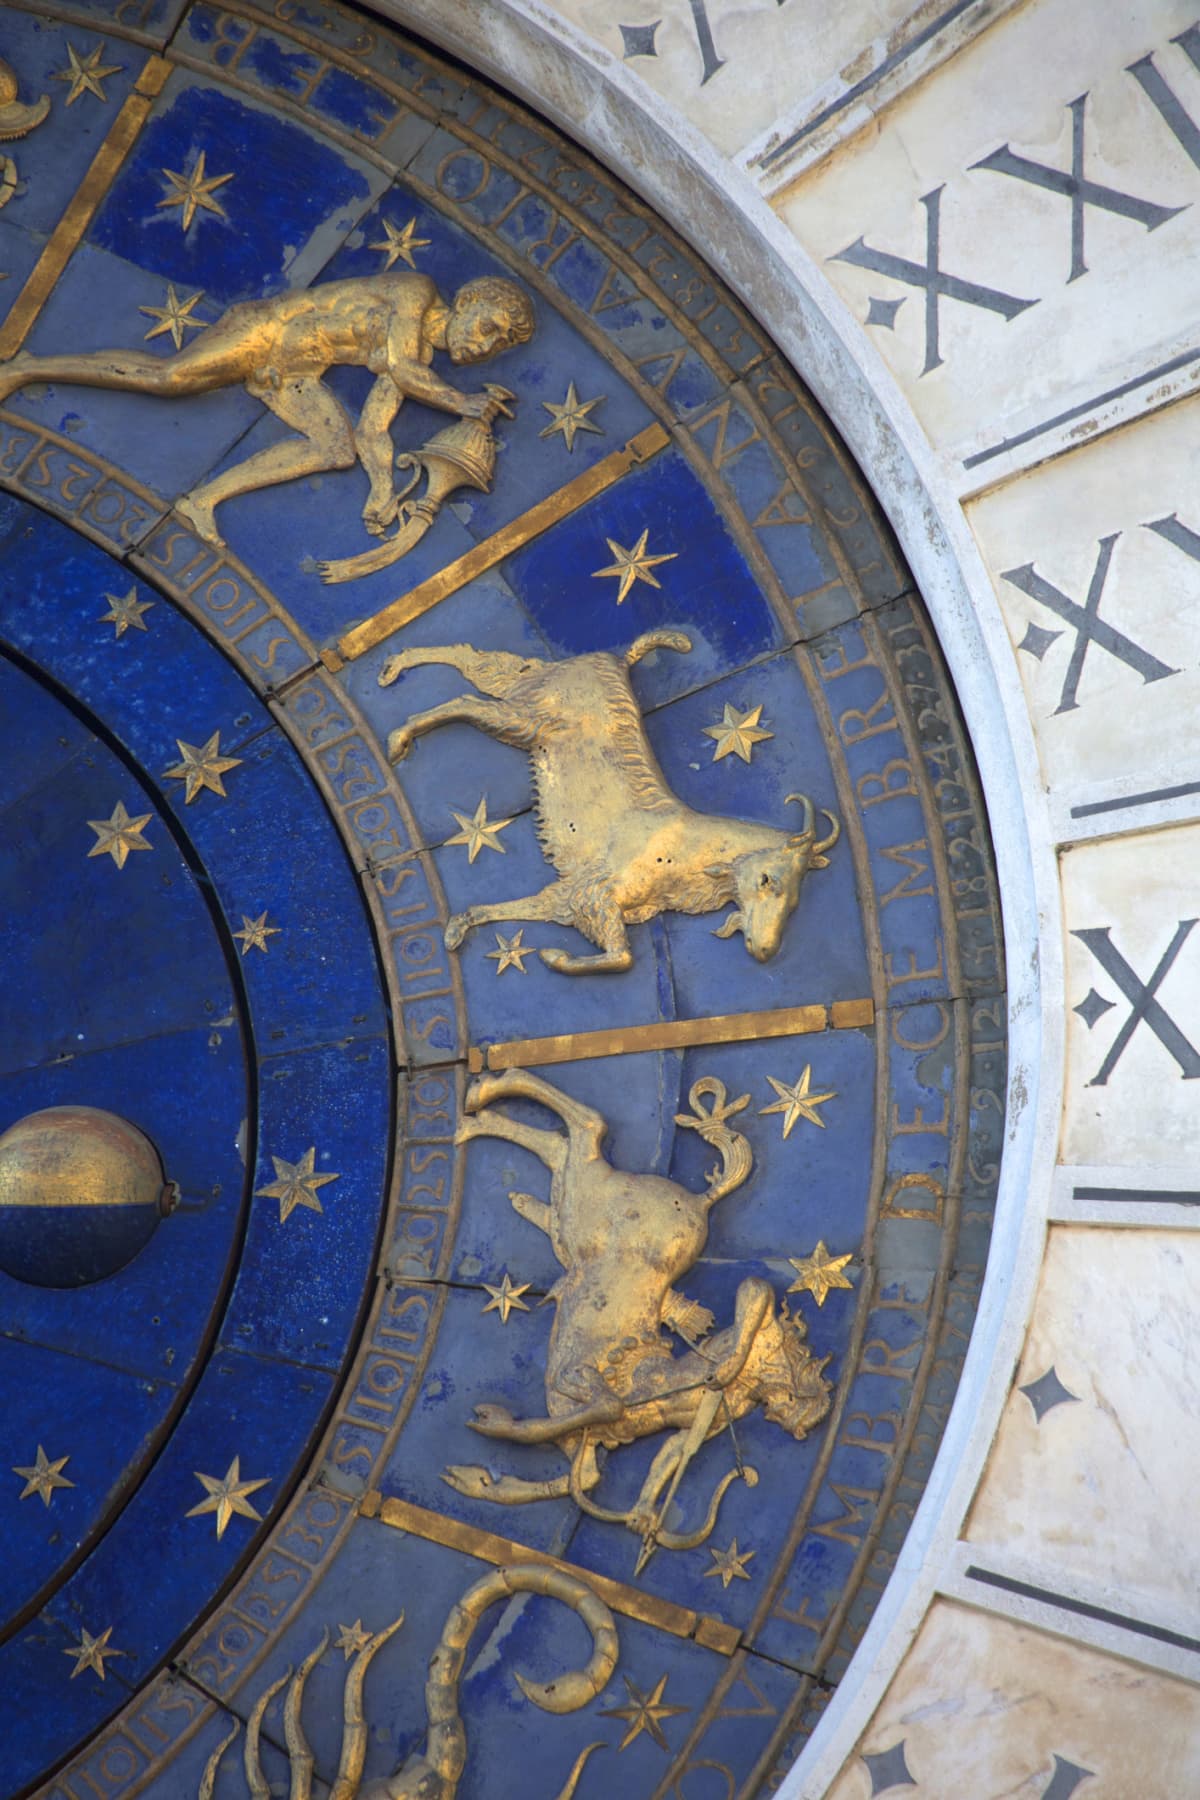 Italy, Venice, detail view of astrological clock in St Mark's square.